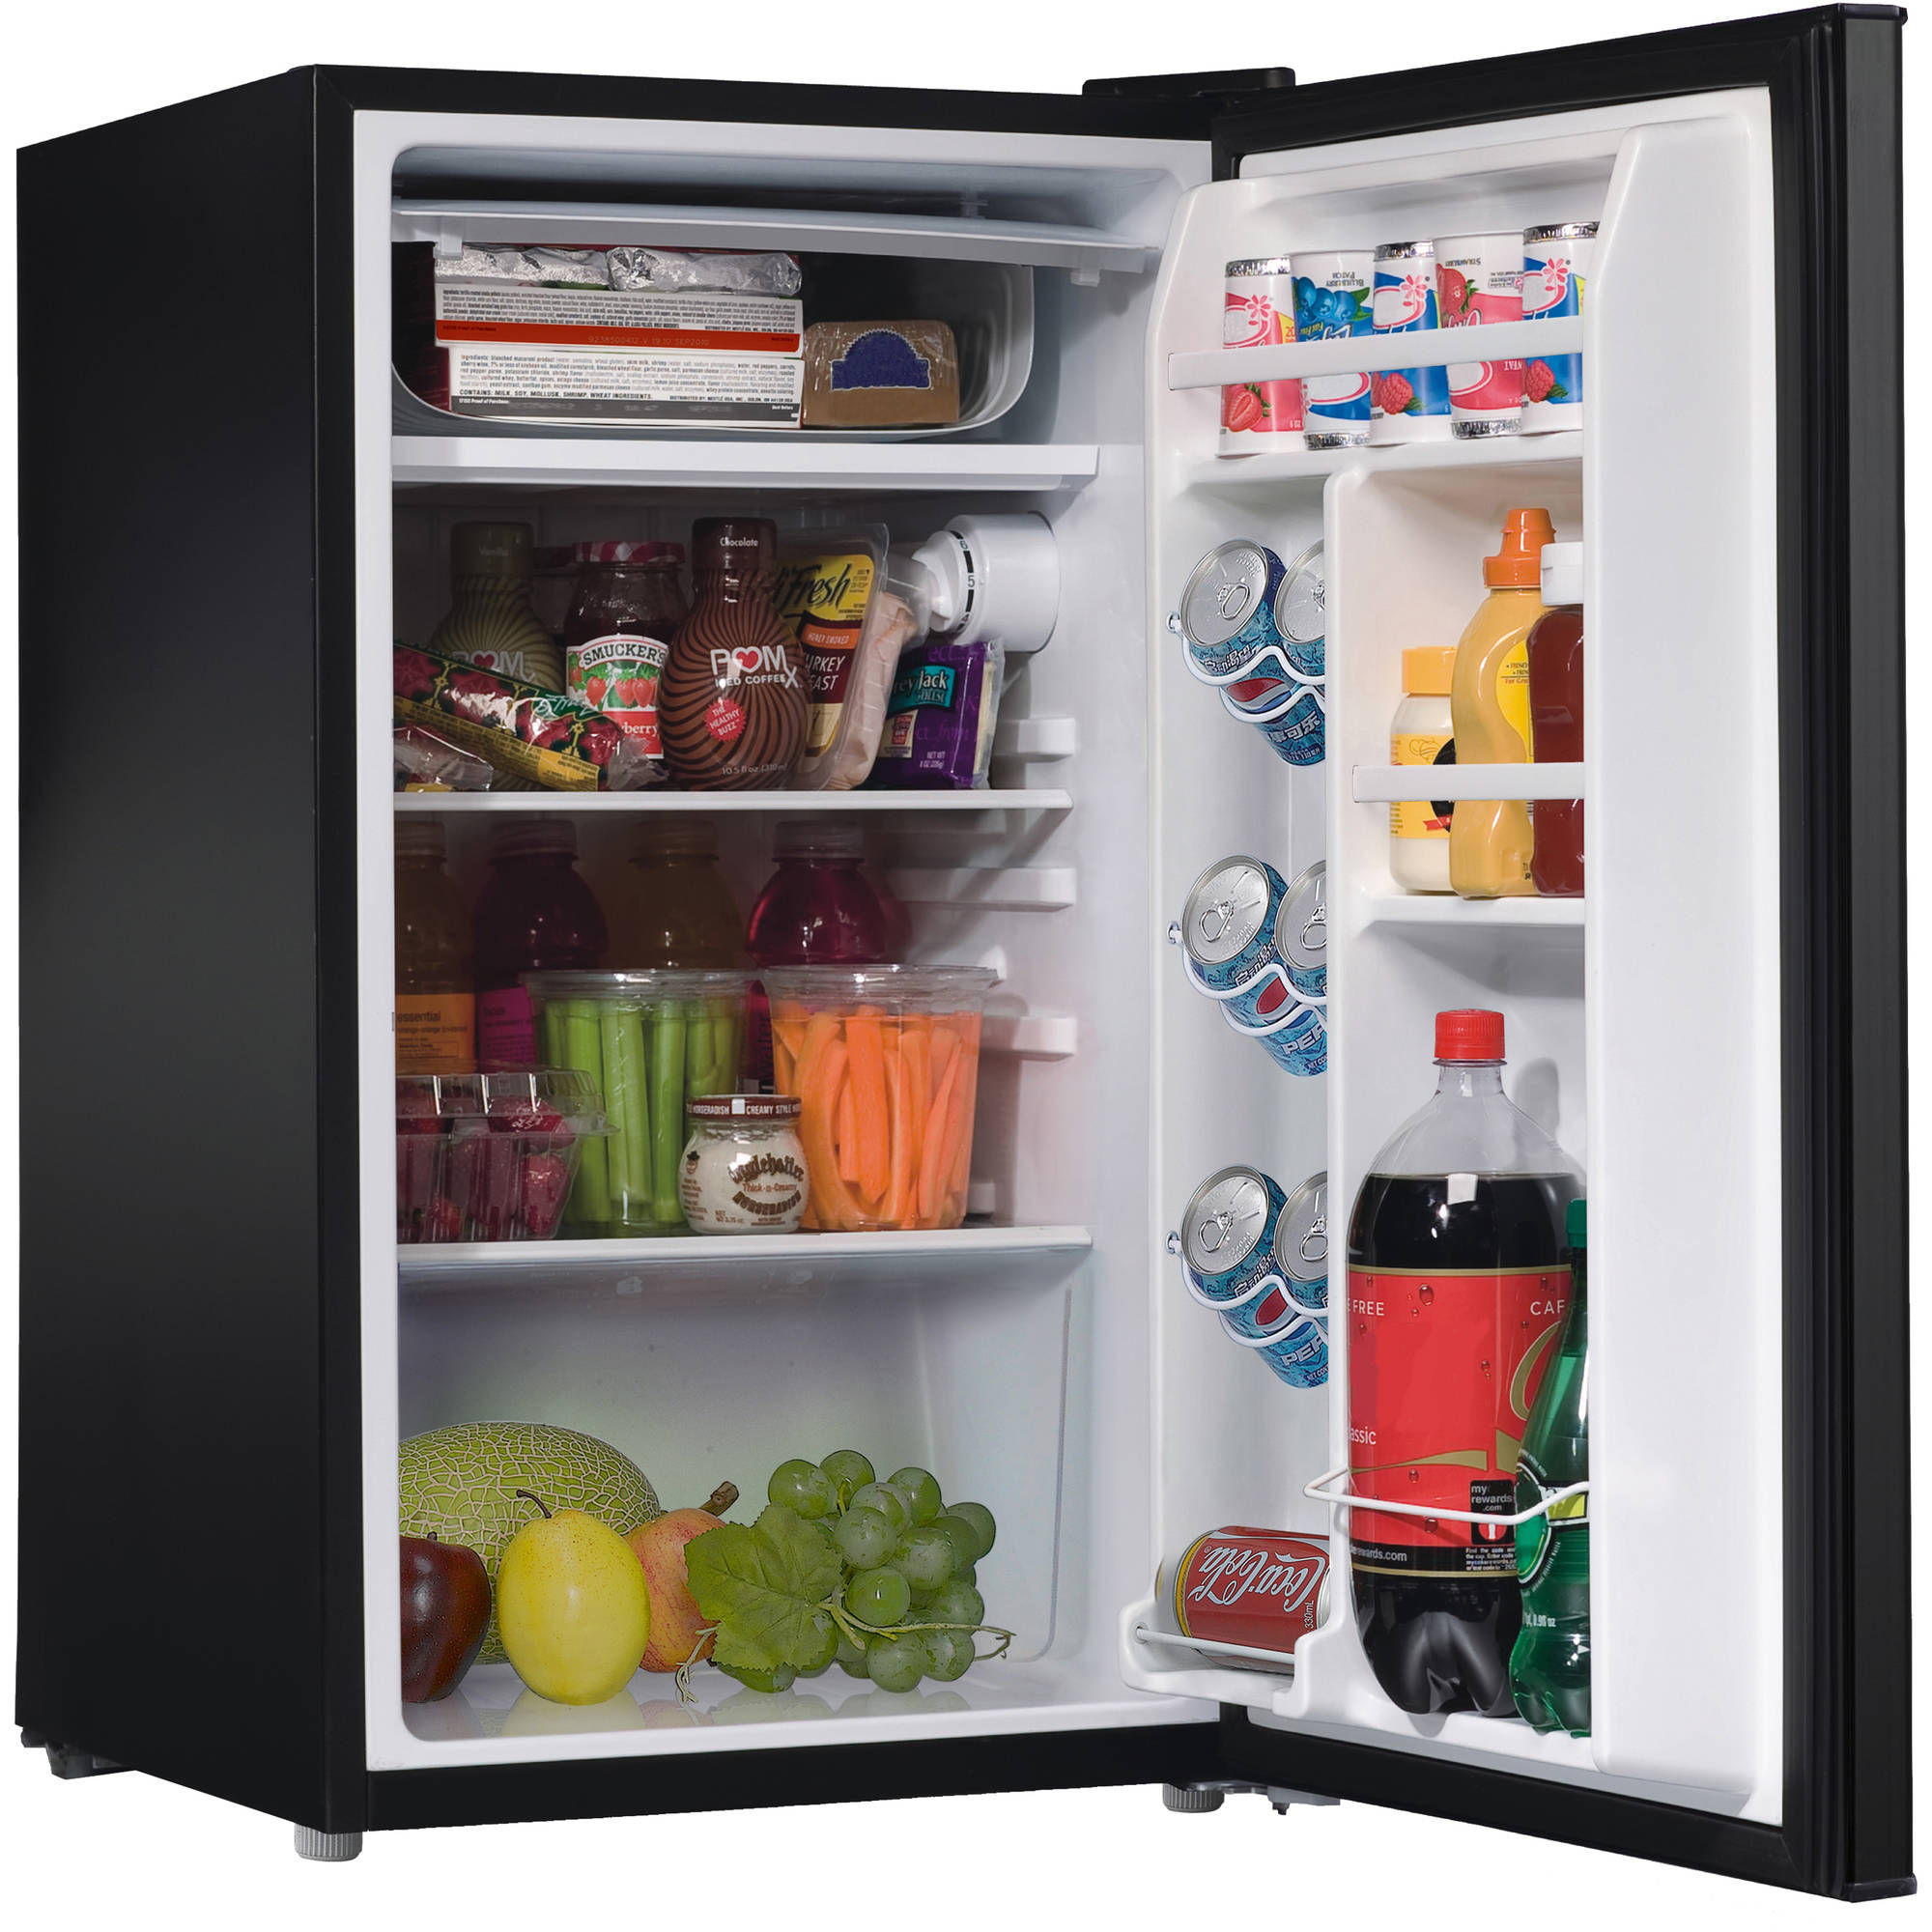 Galanz 3.5 cu ft compact refrigerator for $79, free shipping